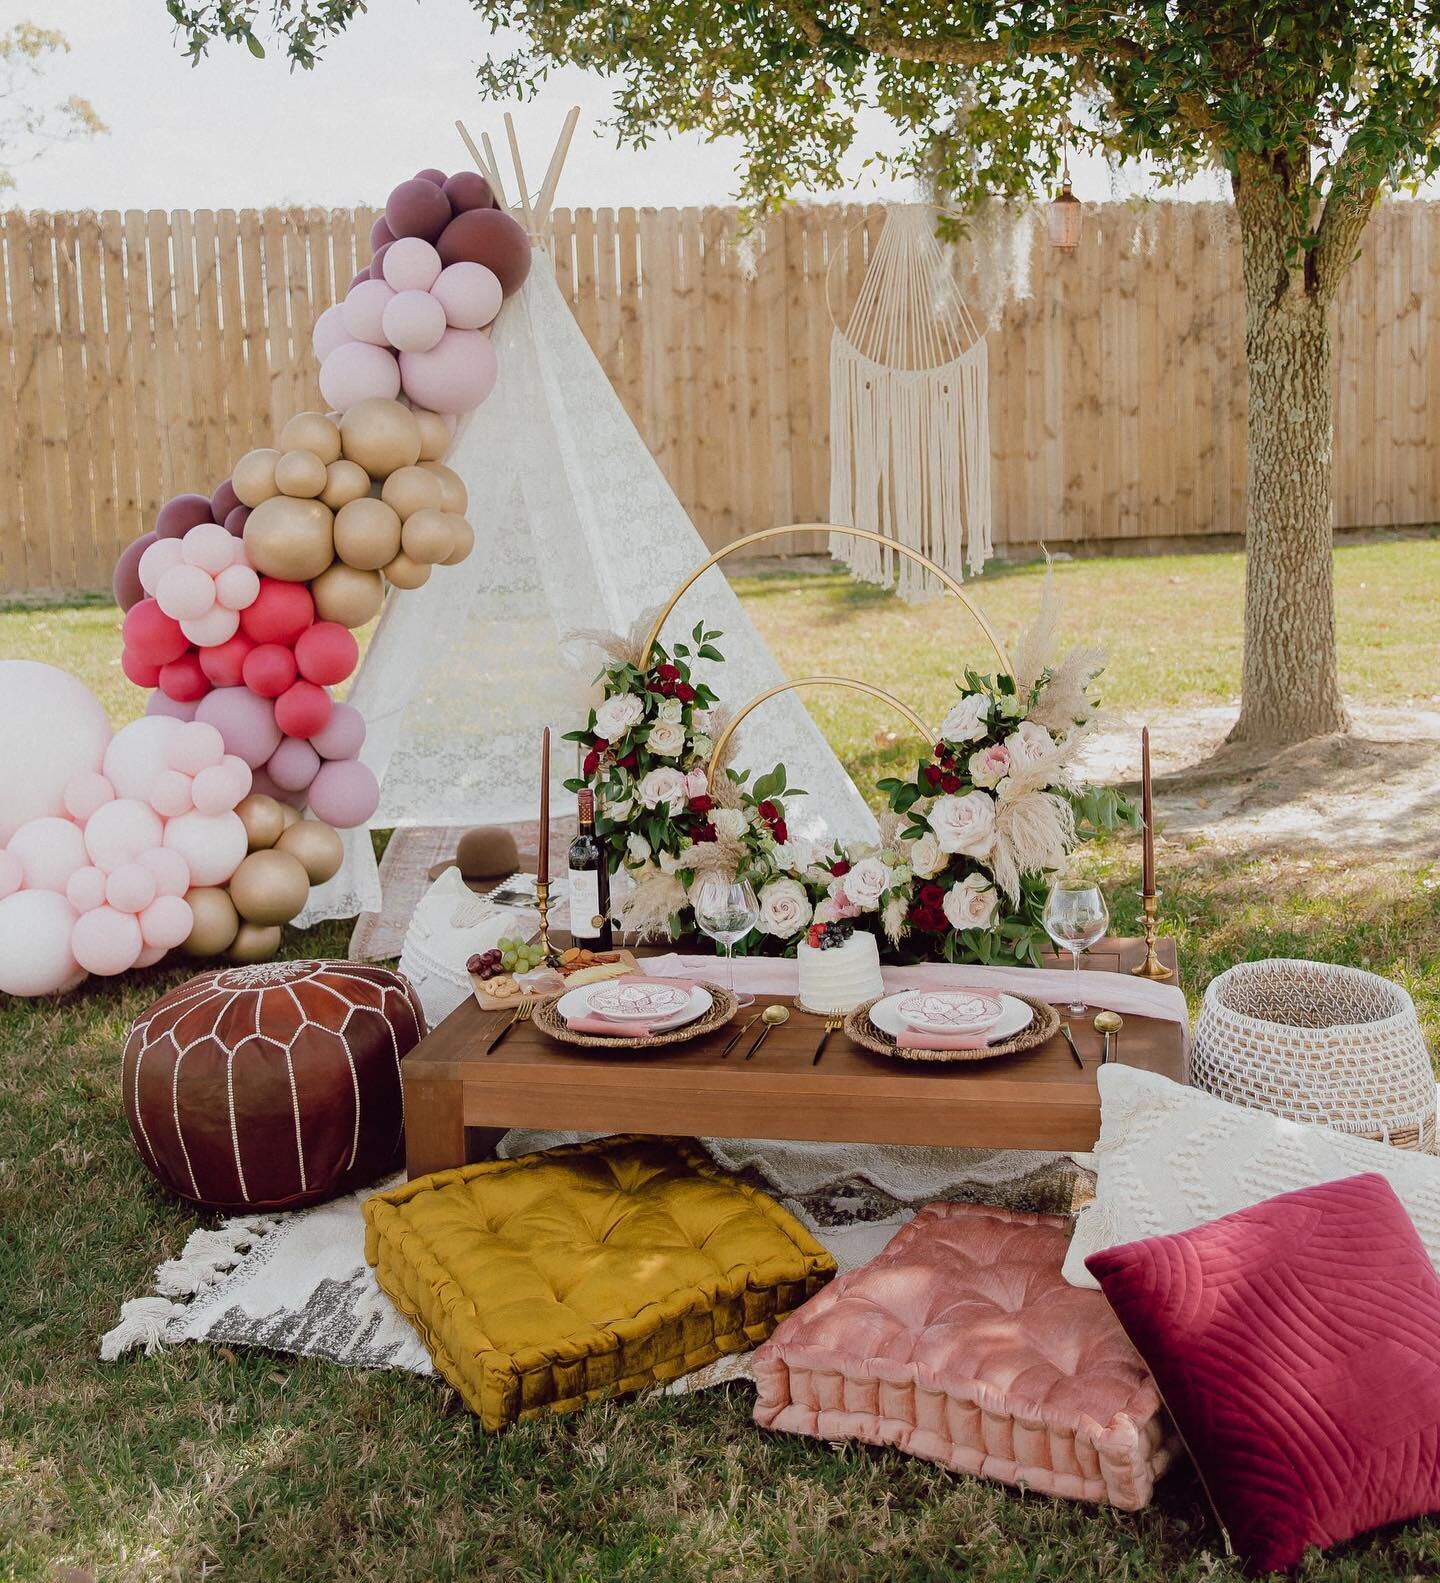 Your intimate backyard picnic, personalized as only SOIGN&Eacute;E DECOR can with Bohemian vibes and touches of elegance that inspire 𝕽𝖔𝖒𝖆𝖓𝖈𝖊..

Dream team✨
Styling/design: @soignee_decor 
Photography: @sarahwardweddings 
Florist: @hummingbird